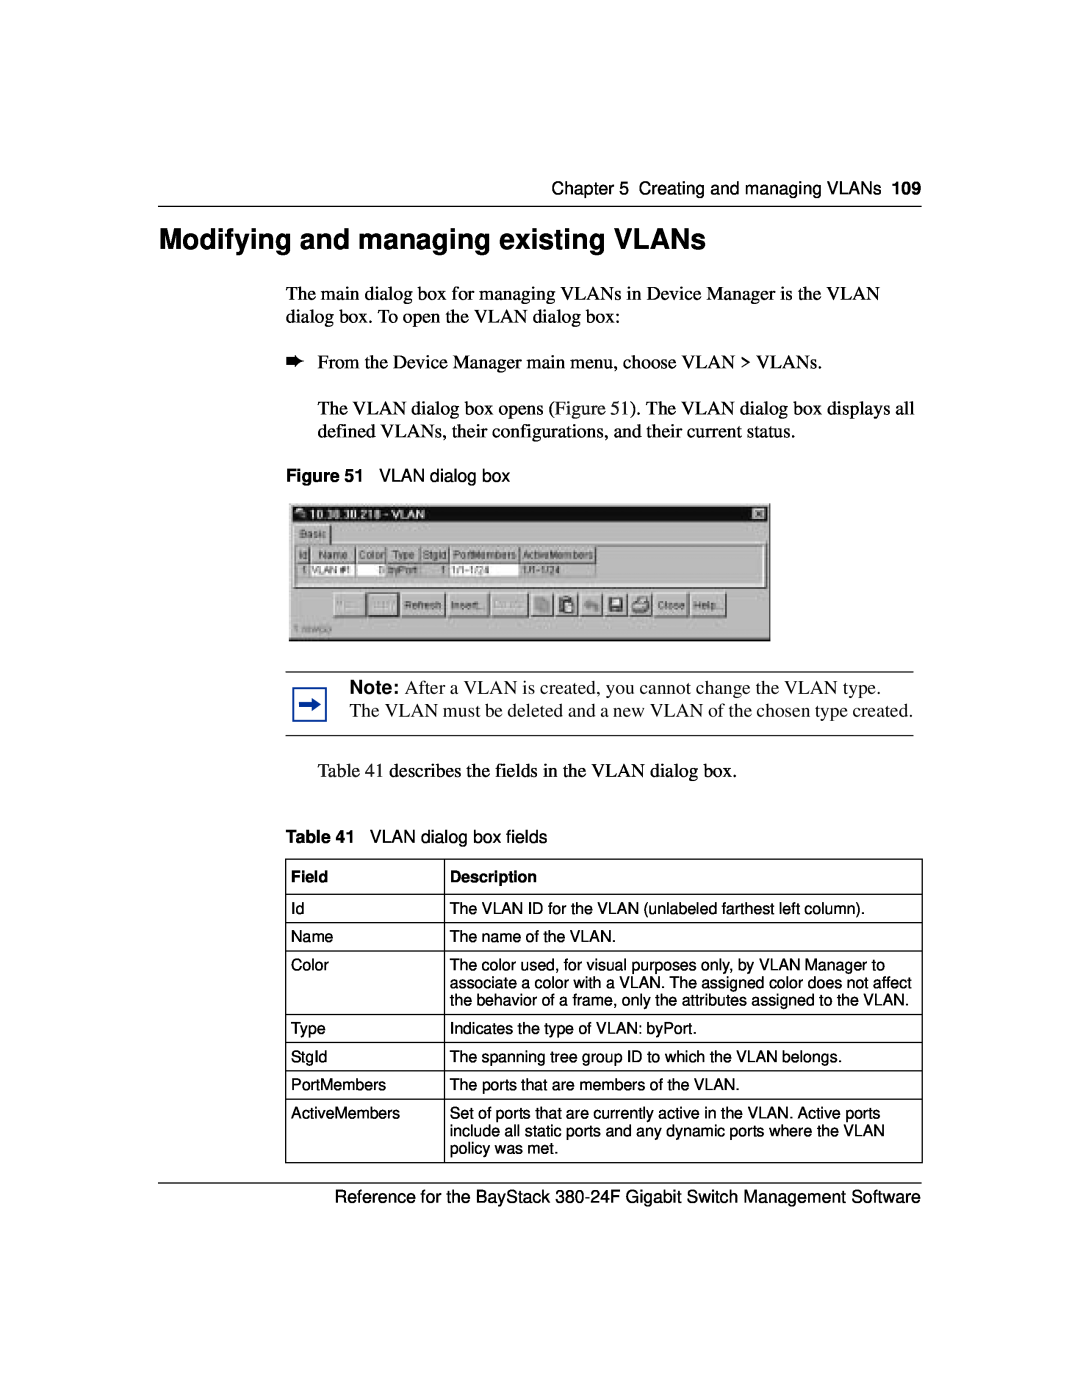 Nortel Networks 214393-A manual Modifying and managing existing VLANs, Creating and managing VLANs, VLAN dialog box 